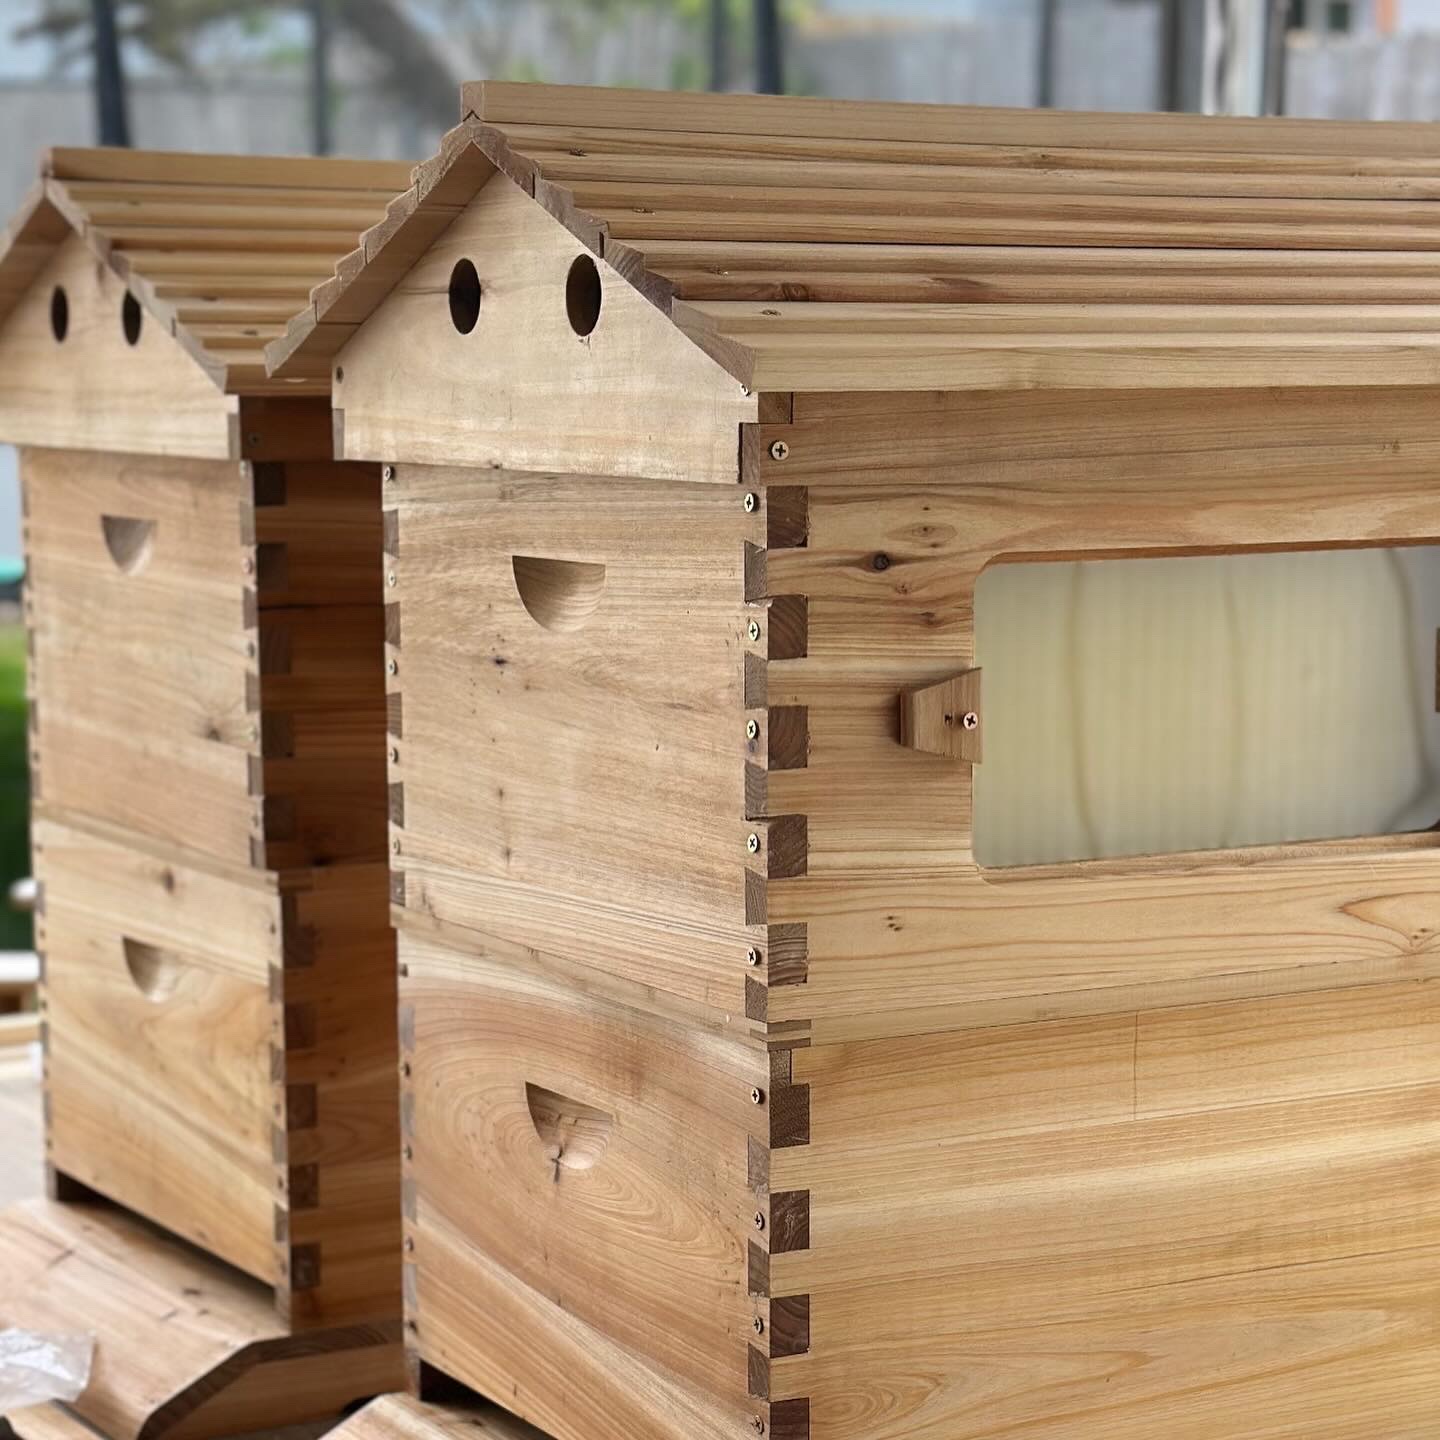 ‘Next Best Thing’ Cedar Hive Kits: takes problem solving, has missing pieces but workable.  thumbnail